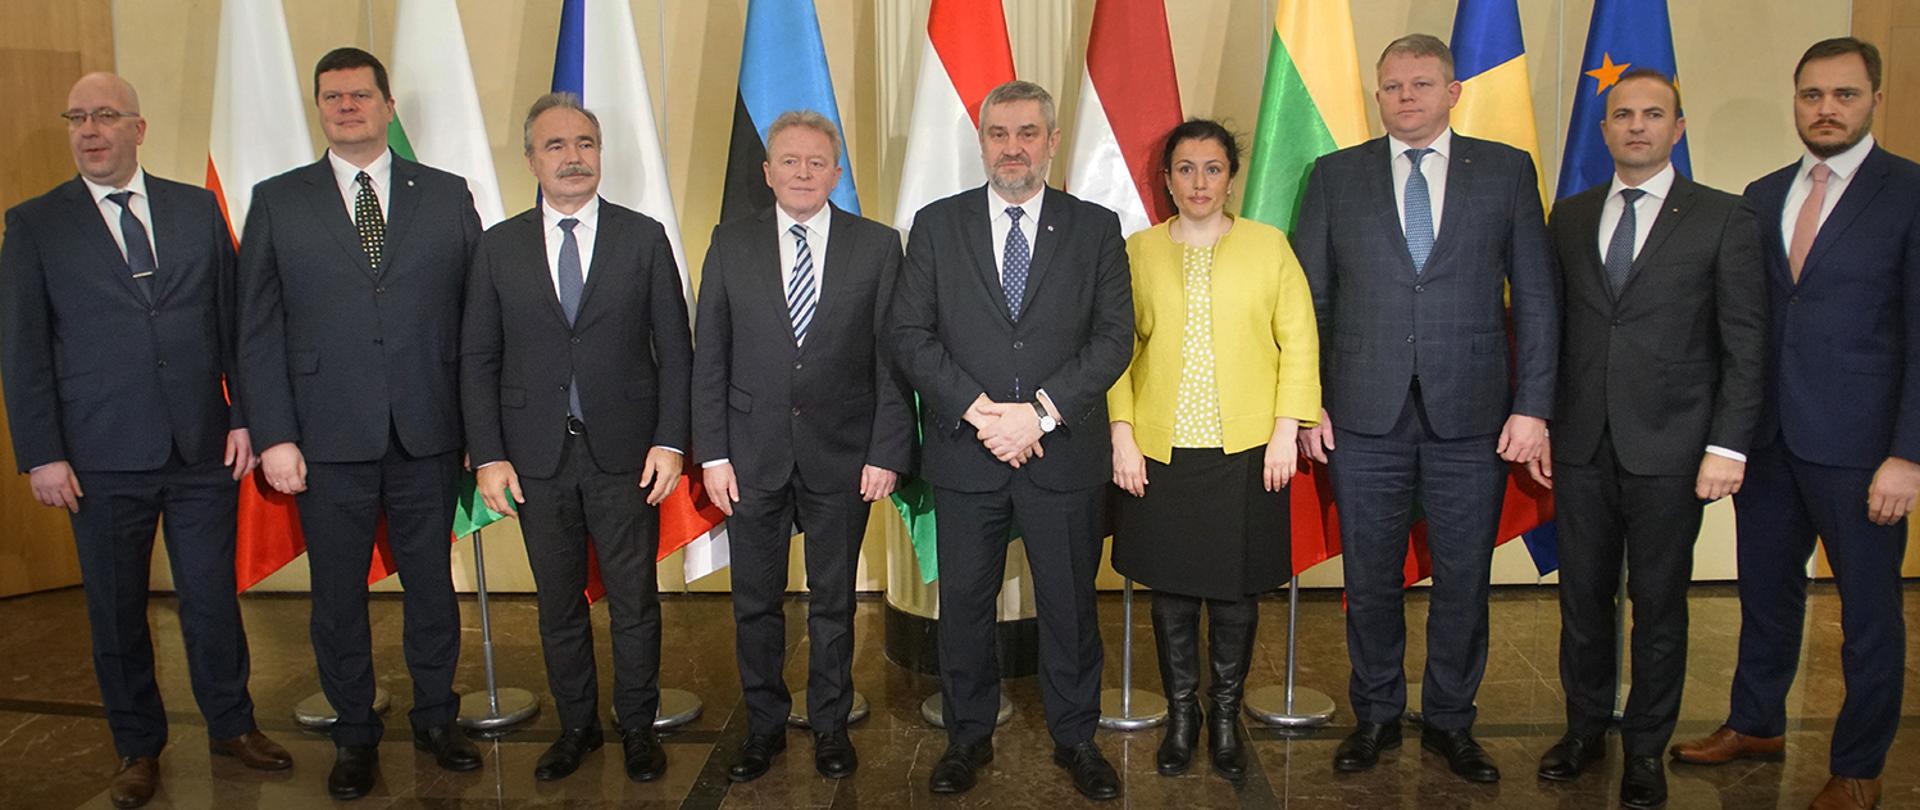 Conference of Agriculture Ministers from eight EU Member States